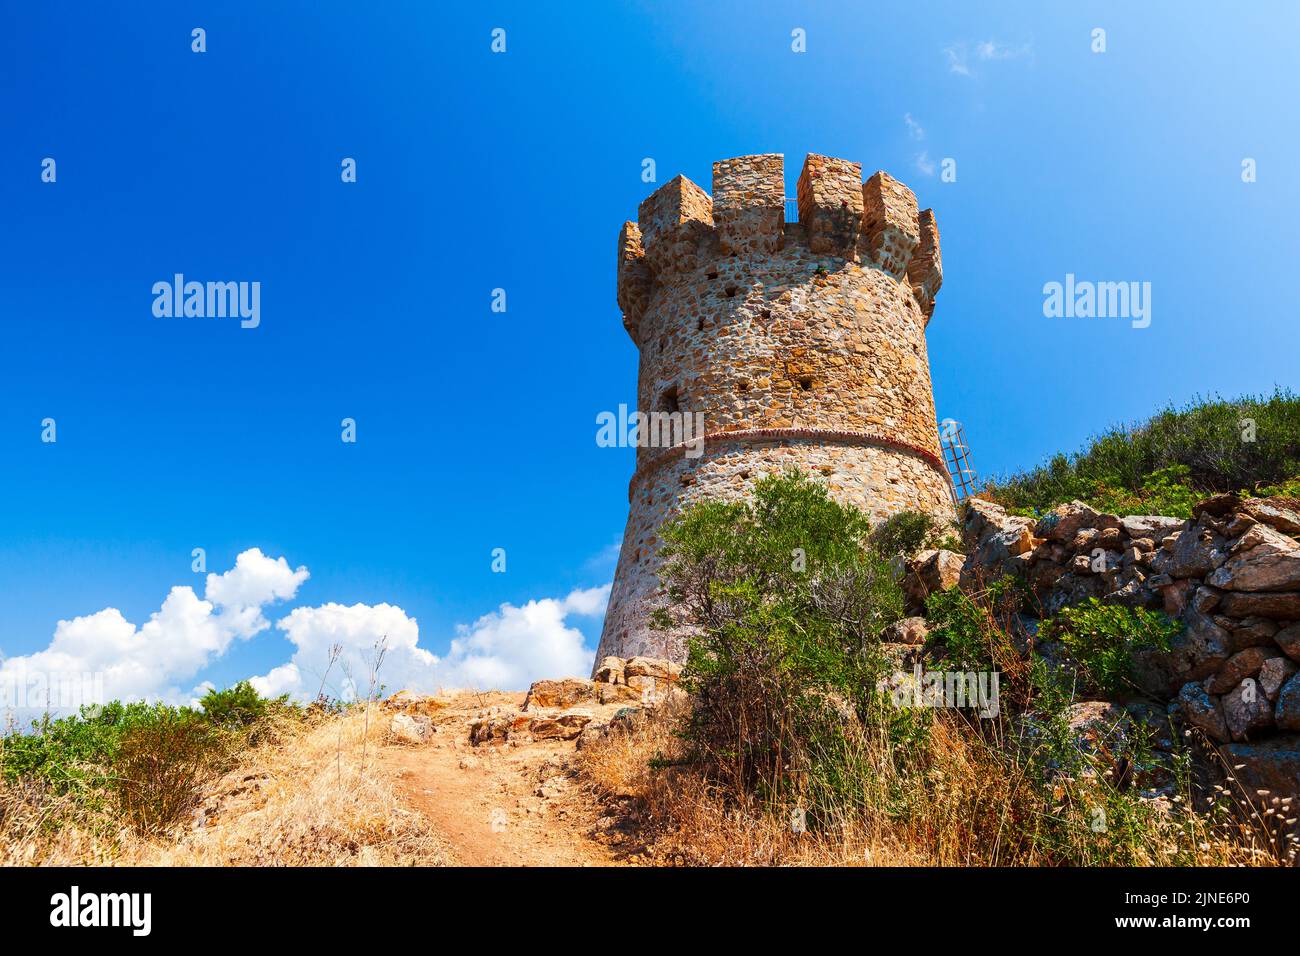 Campanella tower on a sunny day. One of the Genoese towers in Corsica, a series of coastal forts constructed by the Republic of Genoa between 1530 and Stock Photo